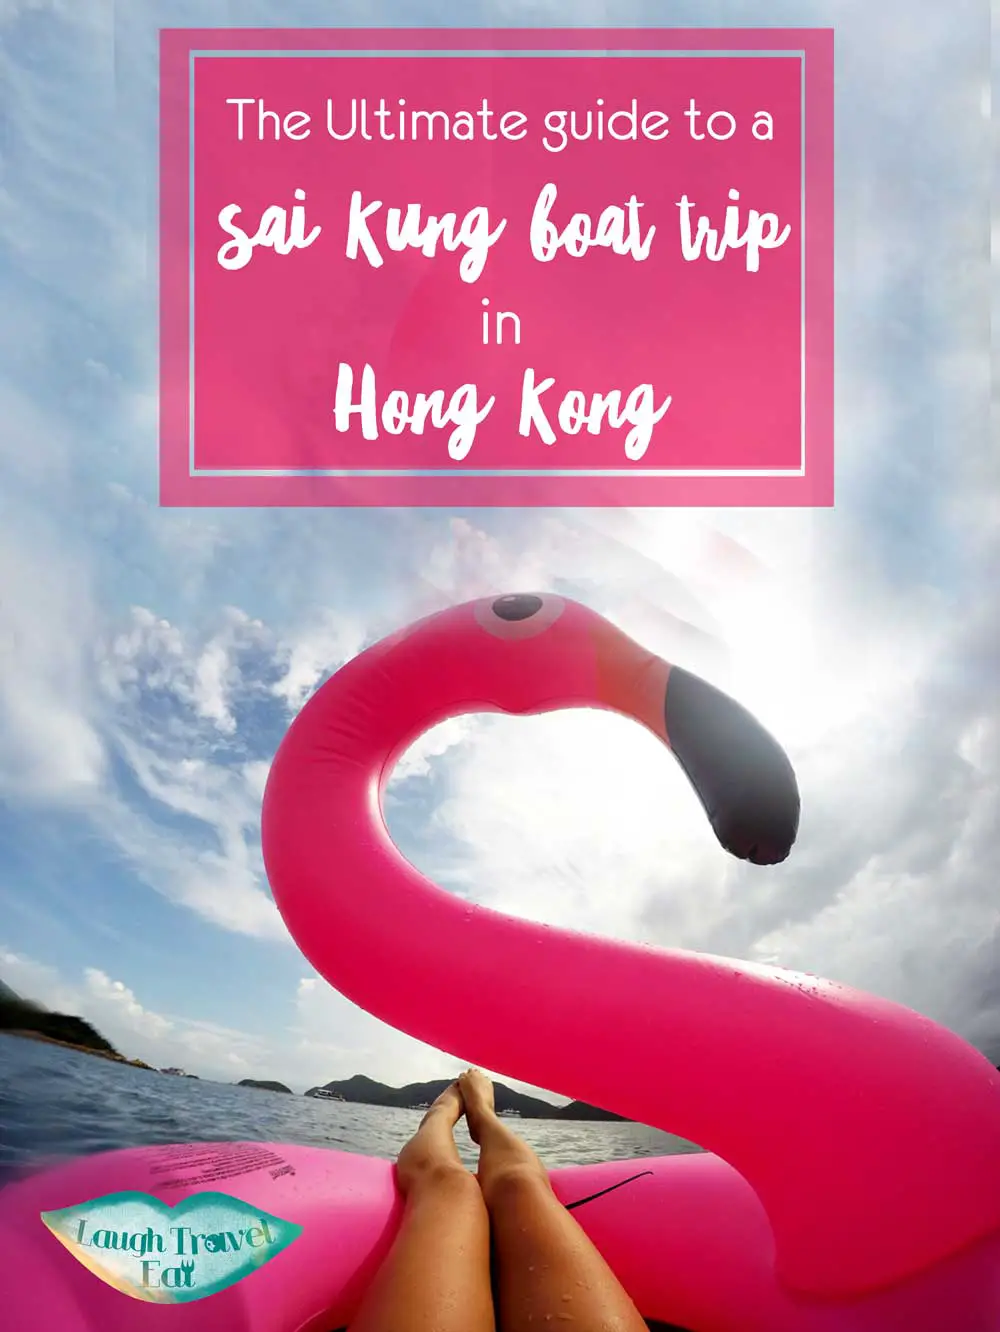 The Ultimate guide to a sai kung boat trip in Hong Kong | Laugh Travel Eat